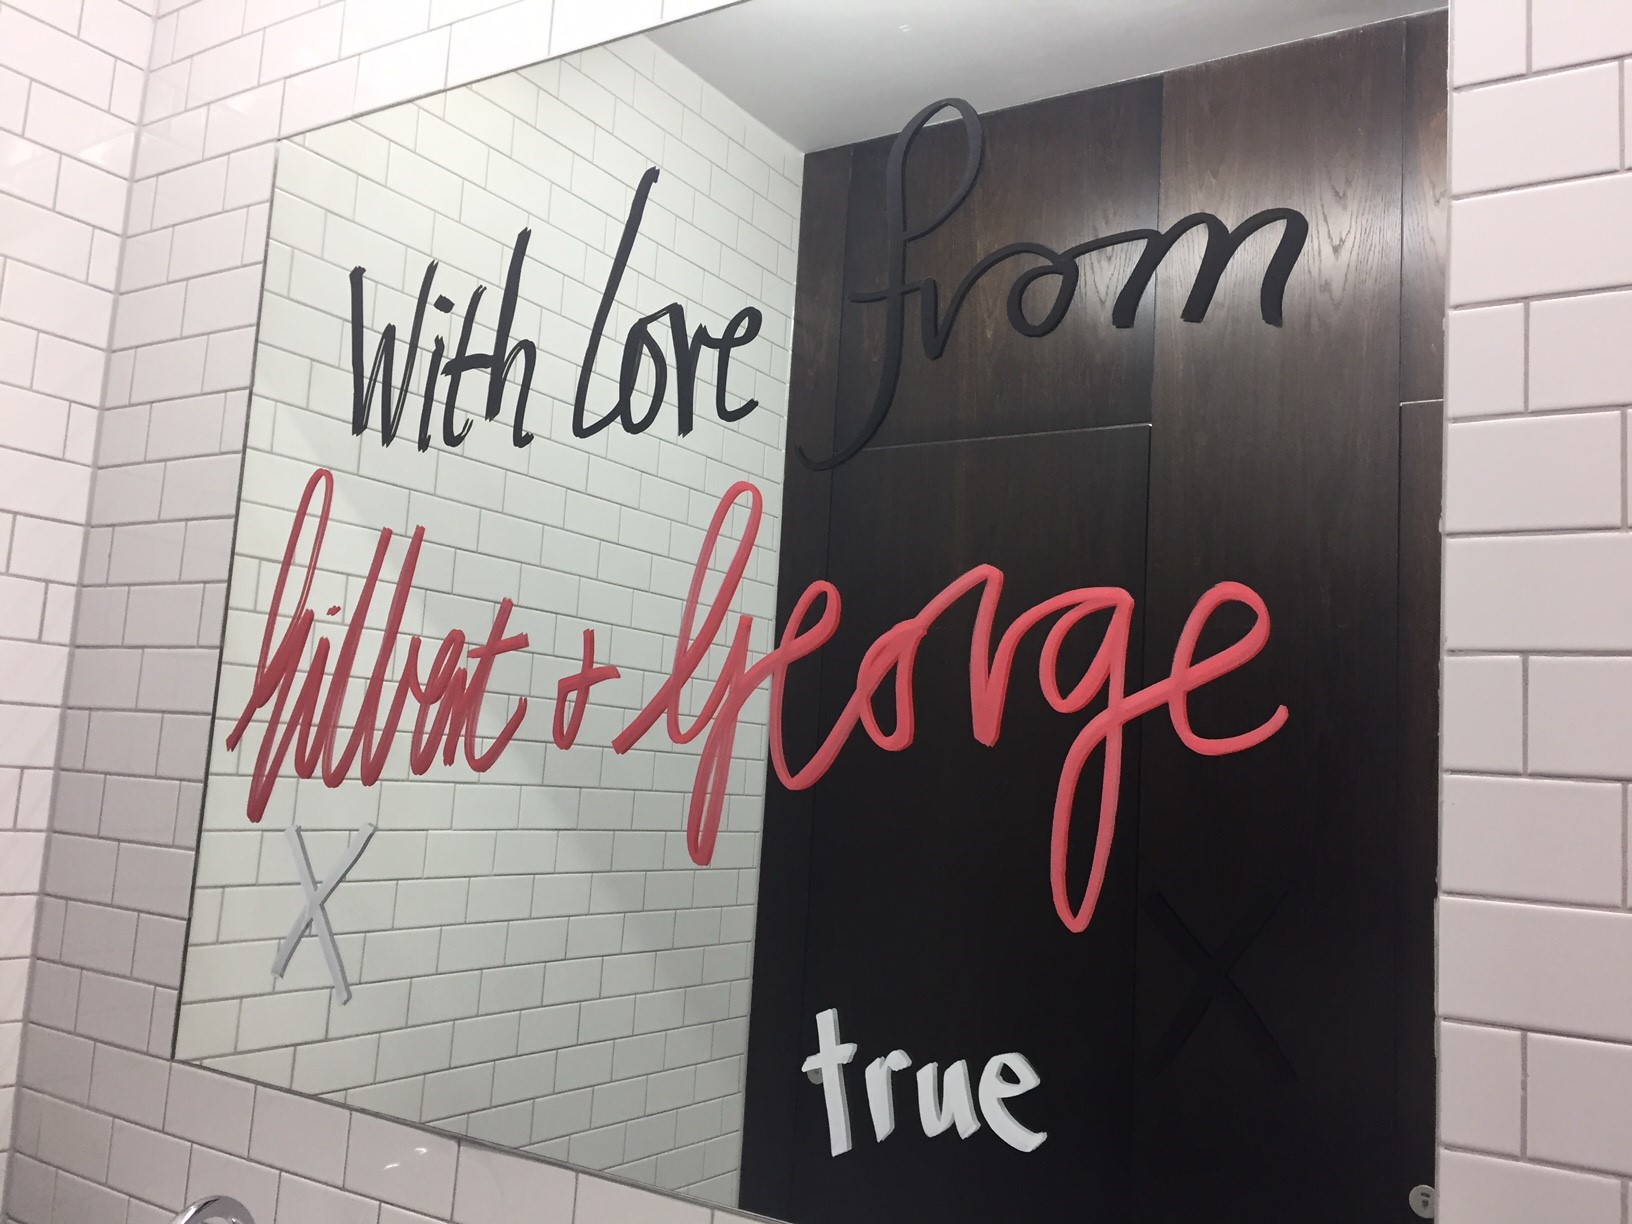 A message from Gilbert and George in the toilets at White Cube (Sherna Noah/PA)